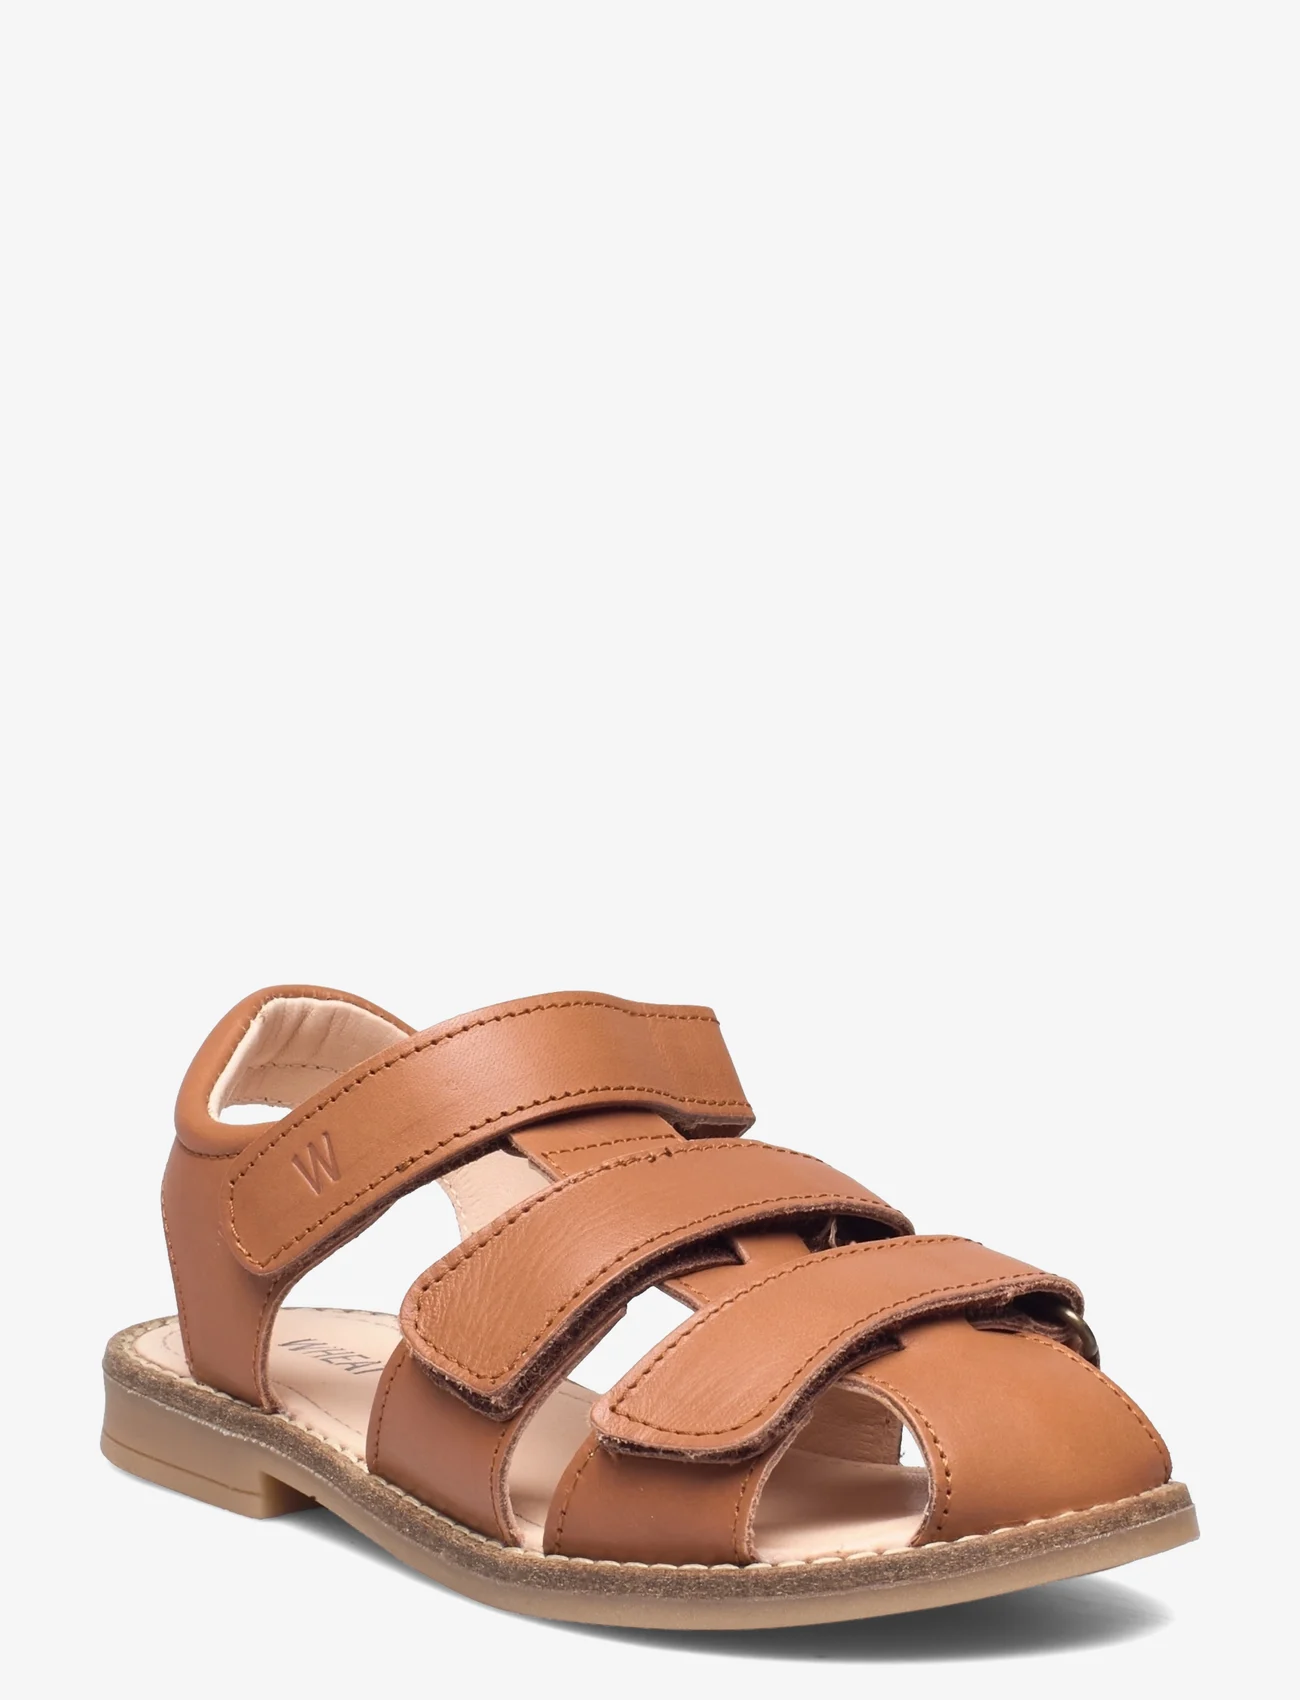 Wheat - Addison leather sandal - sommarfynd - amber brown - 0